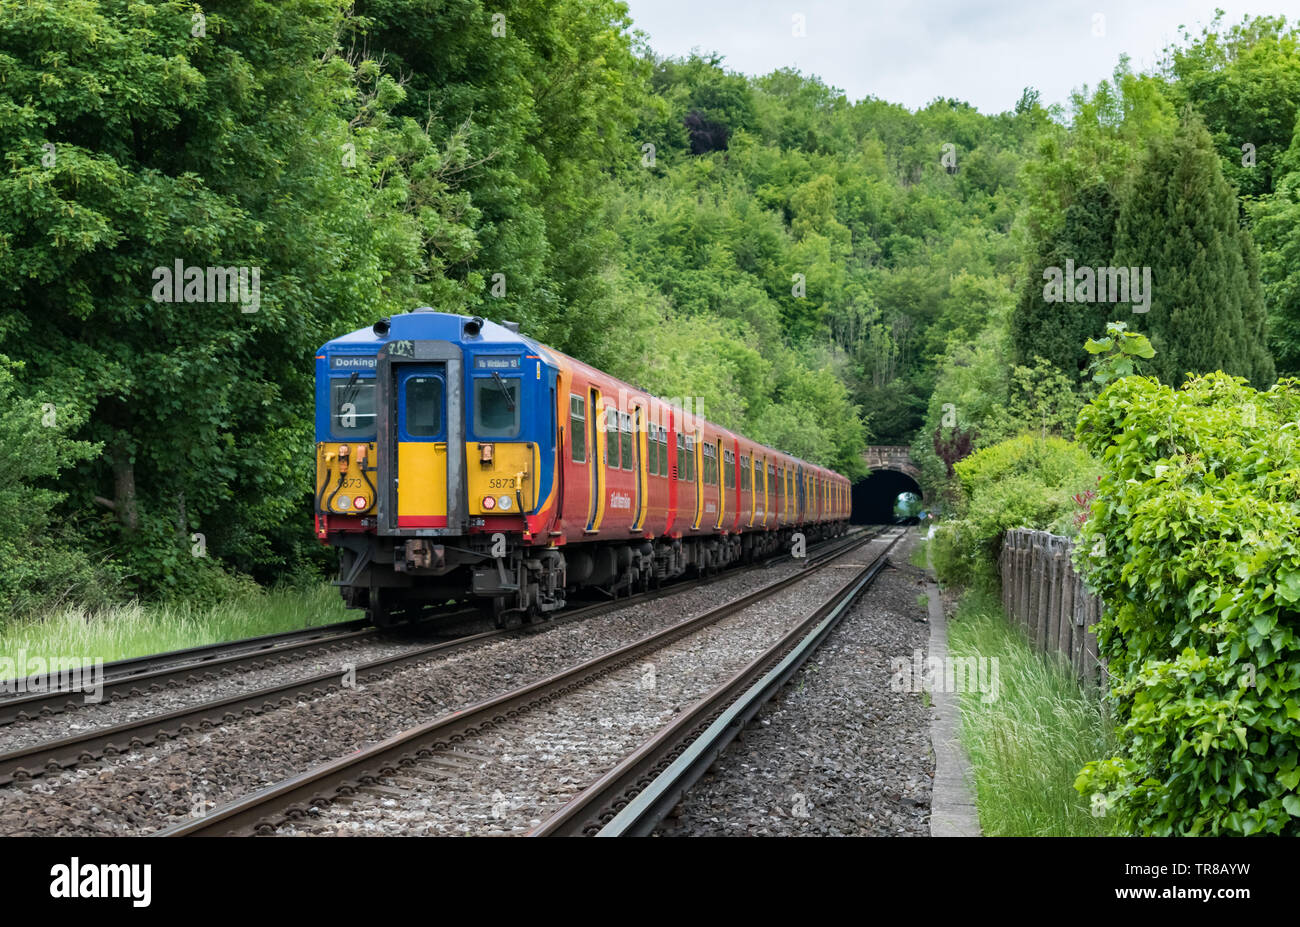 A Class 455 South Western Railway passenger service train approaches a tunnel in the Surrey countryside at Norbury Park, heading for London. Stock Photo